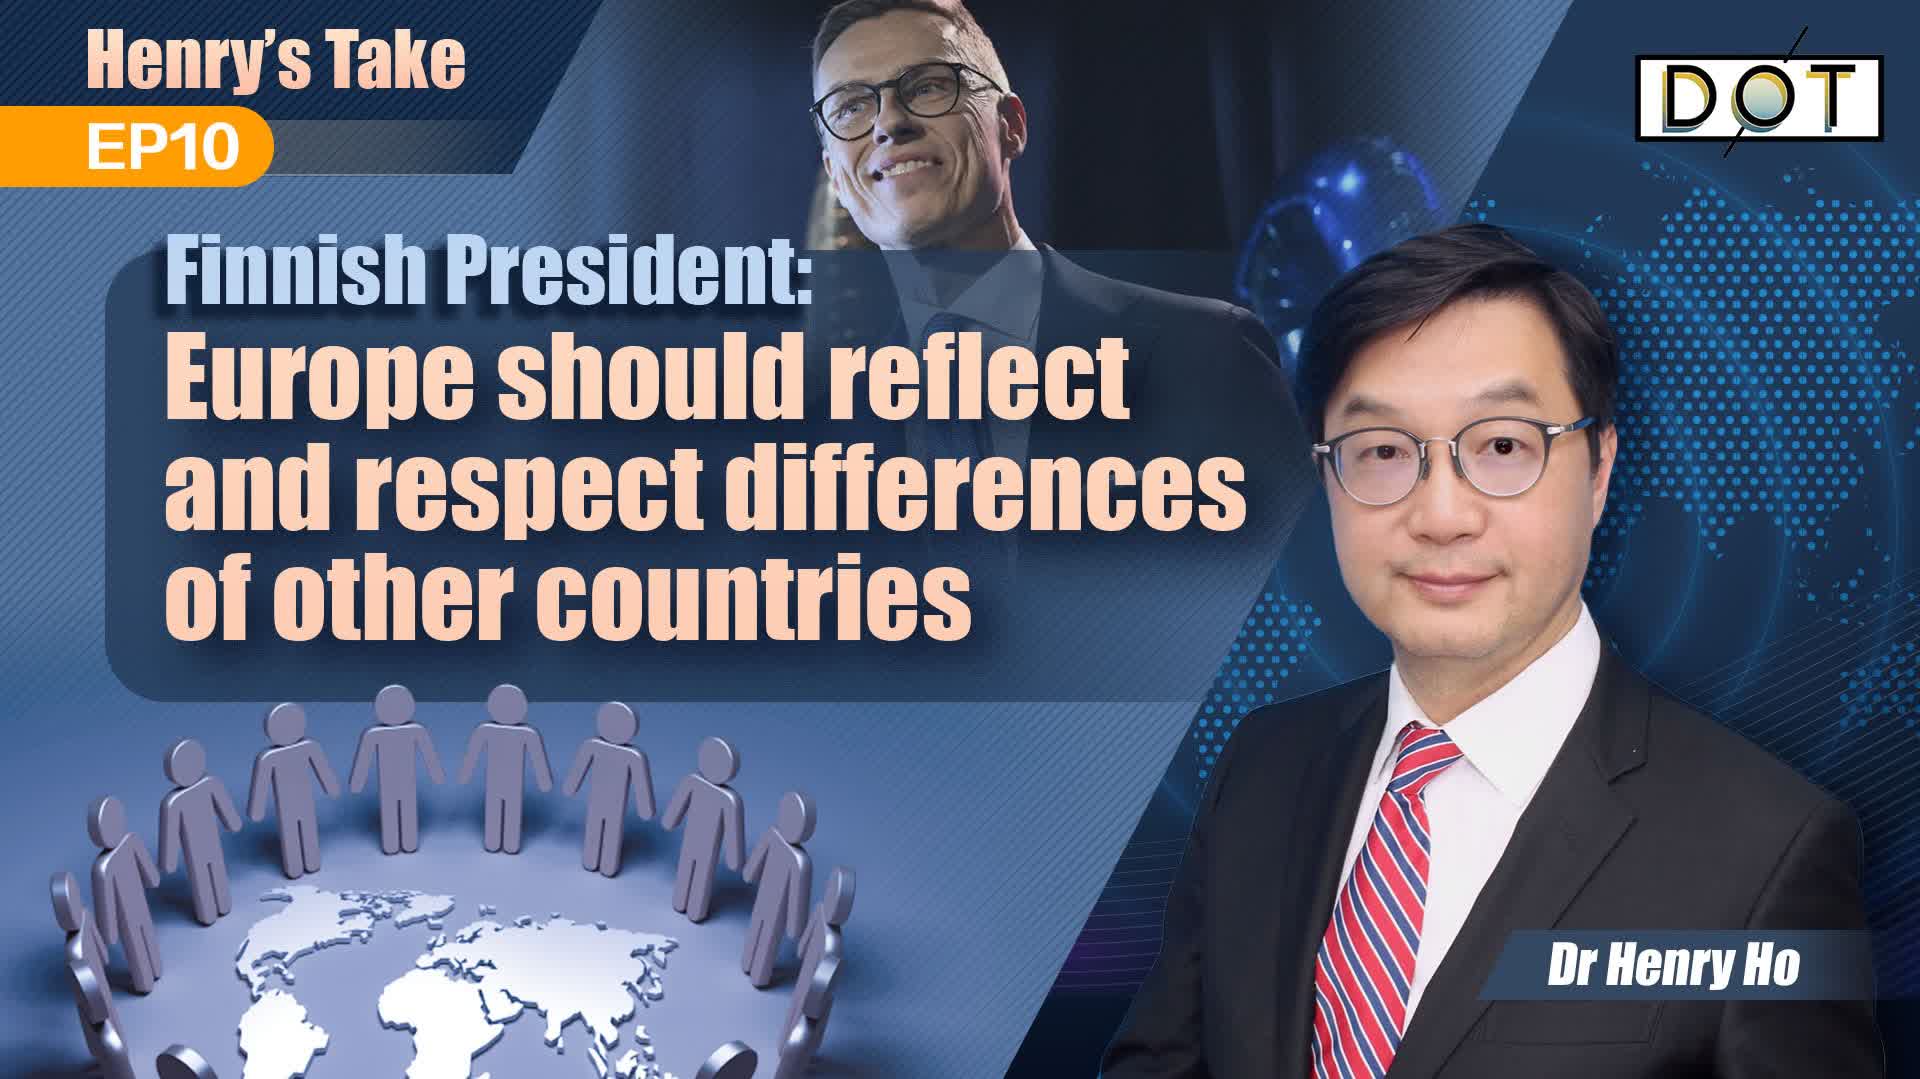 Henry's Take EP10 | Finnish President: Europe should reflect and respect differences of other countries